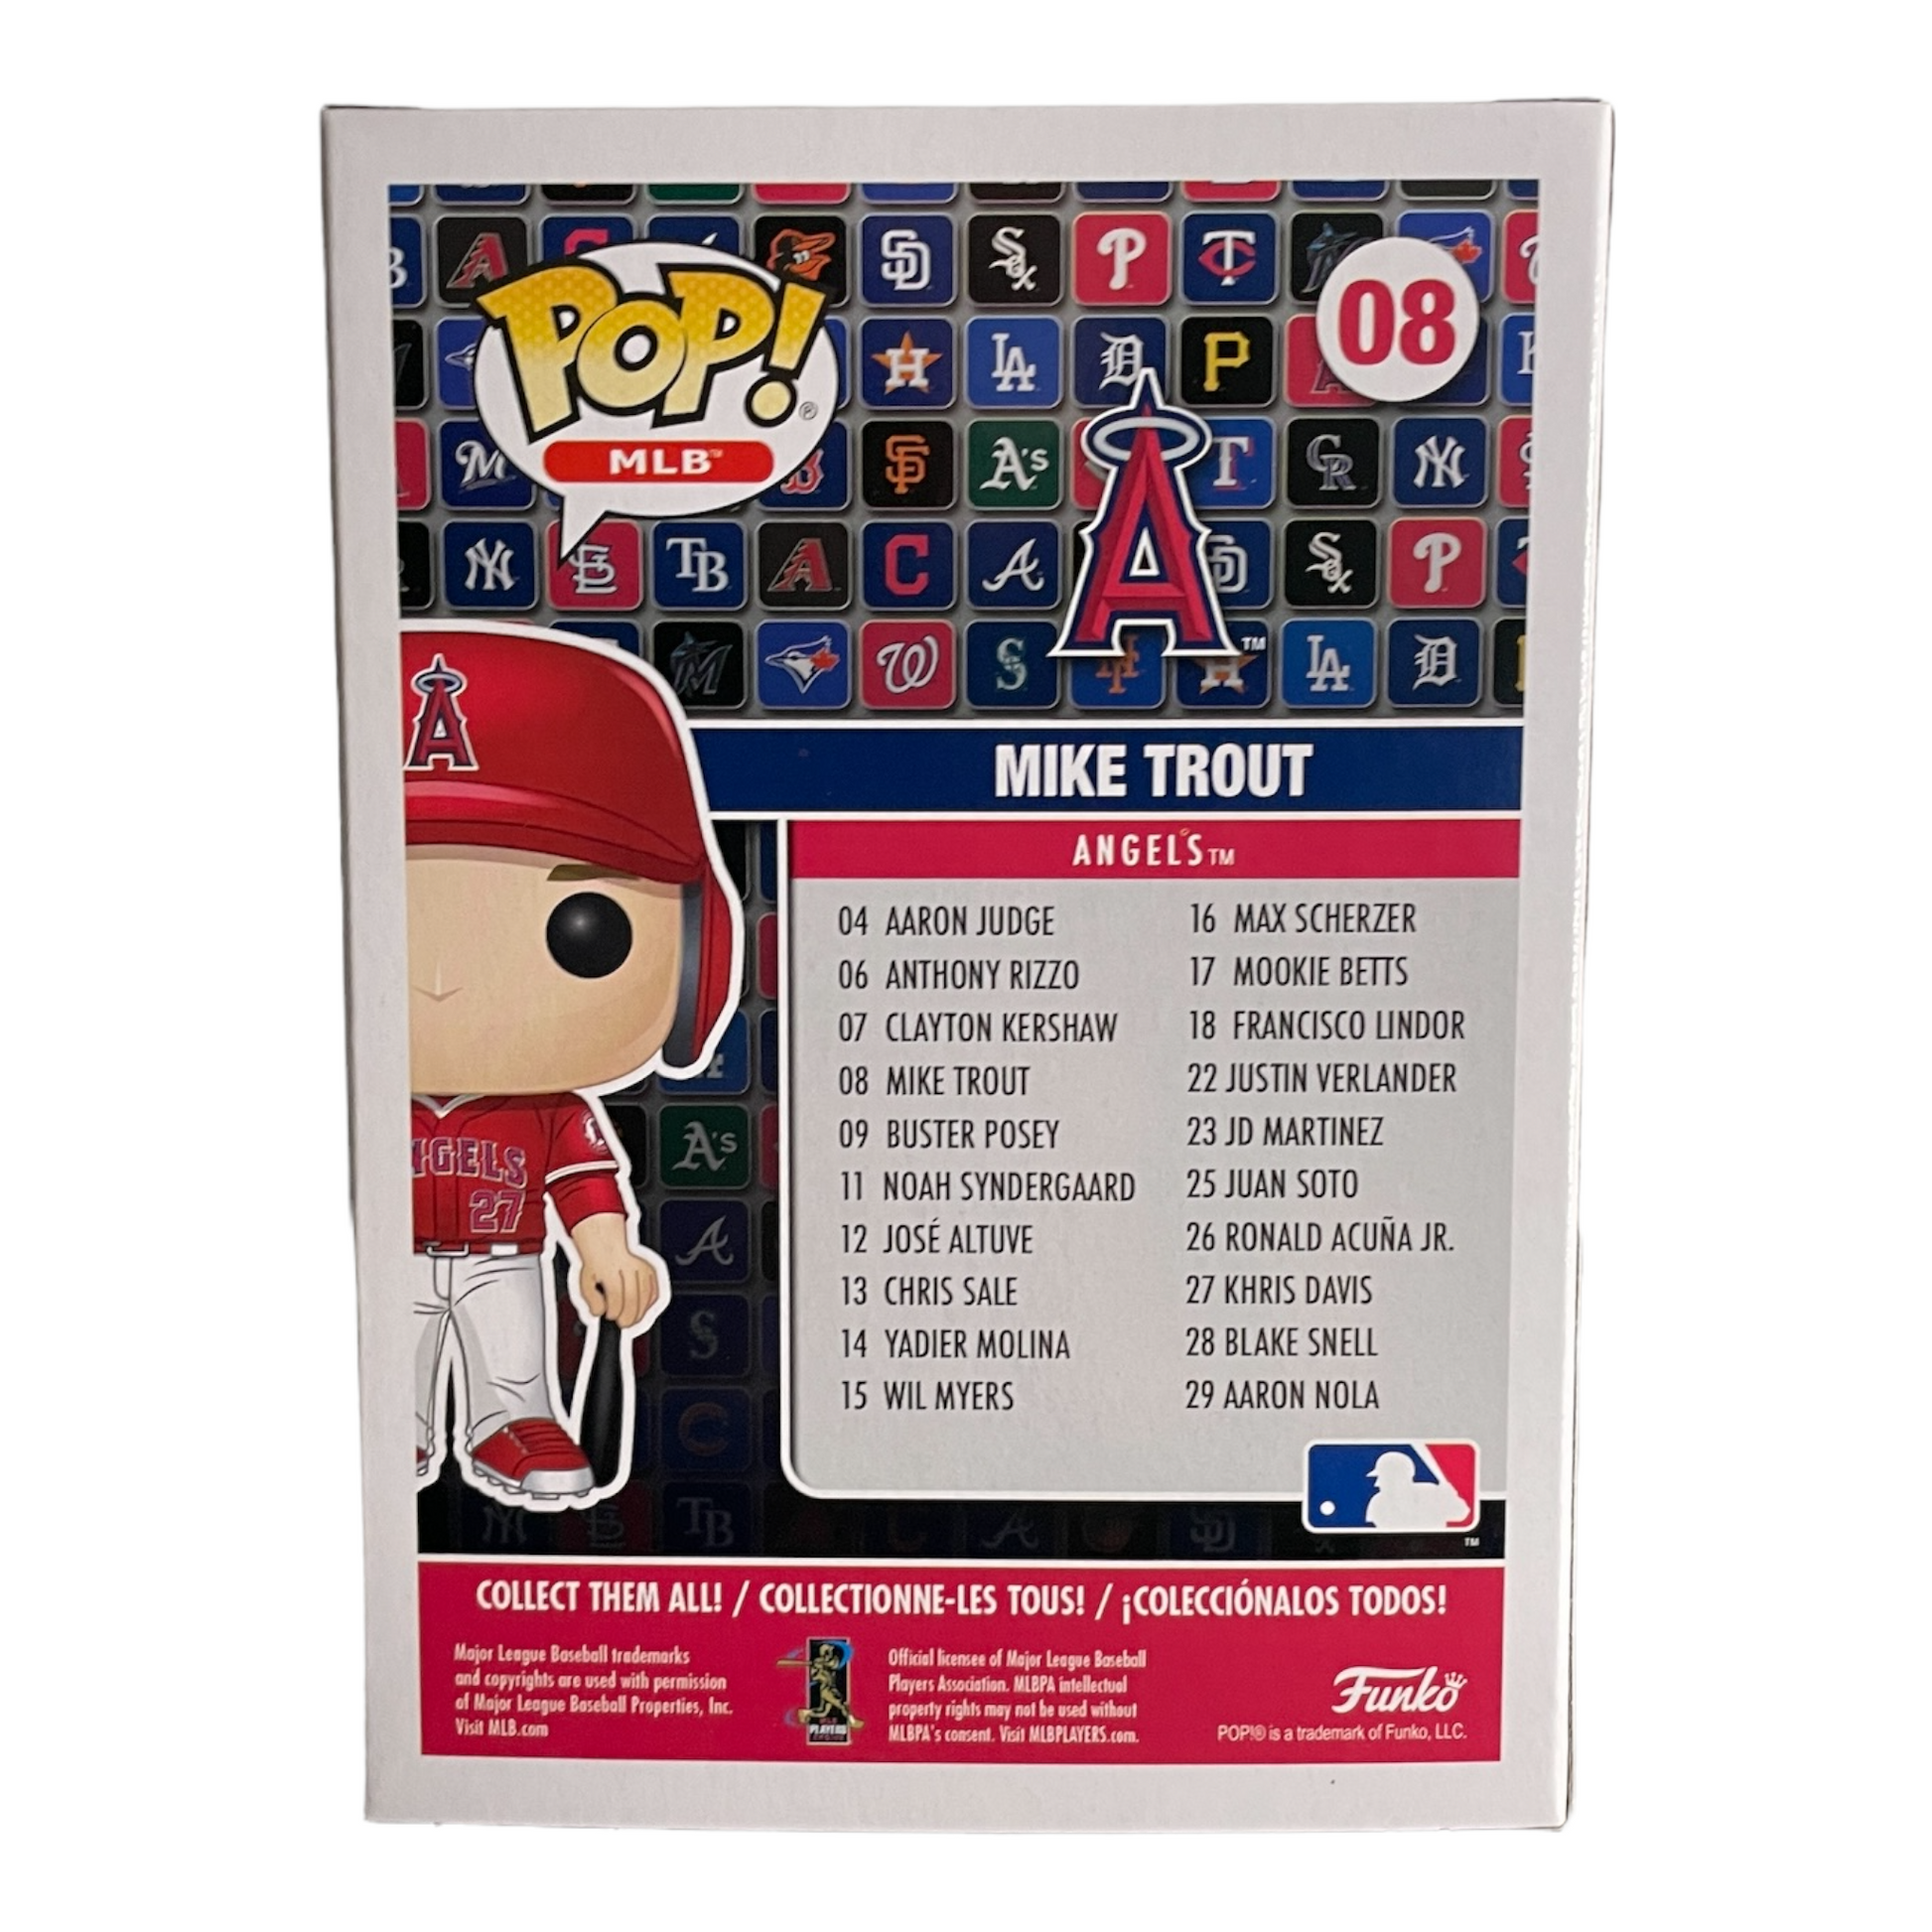 Mike Trout Signed Angels #08 Funko Pop! Vinyl Figure (MLB)